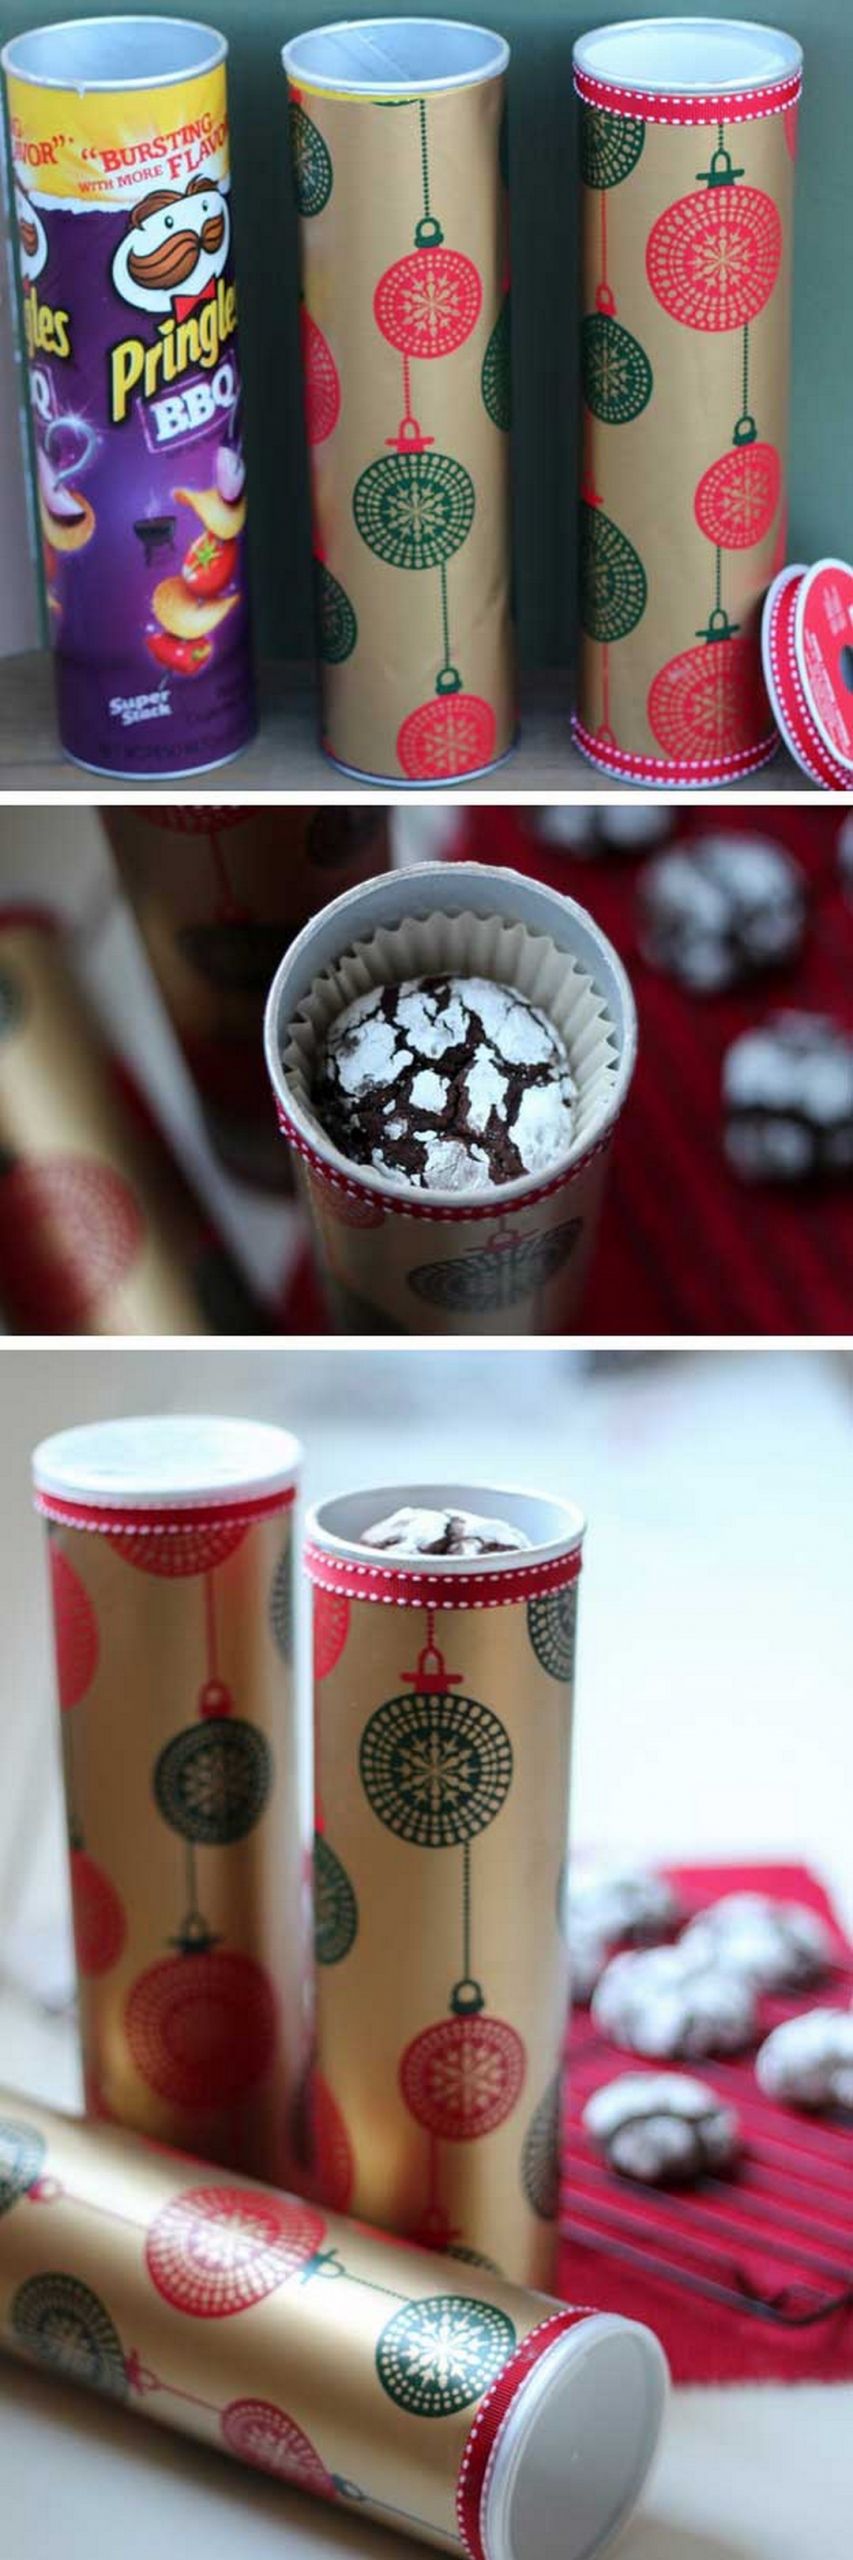 Best DIY Christmas Gifts
 Best DIY Christmas Gifts Ideas for Your Family or Friends